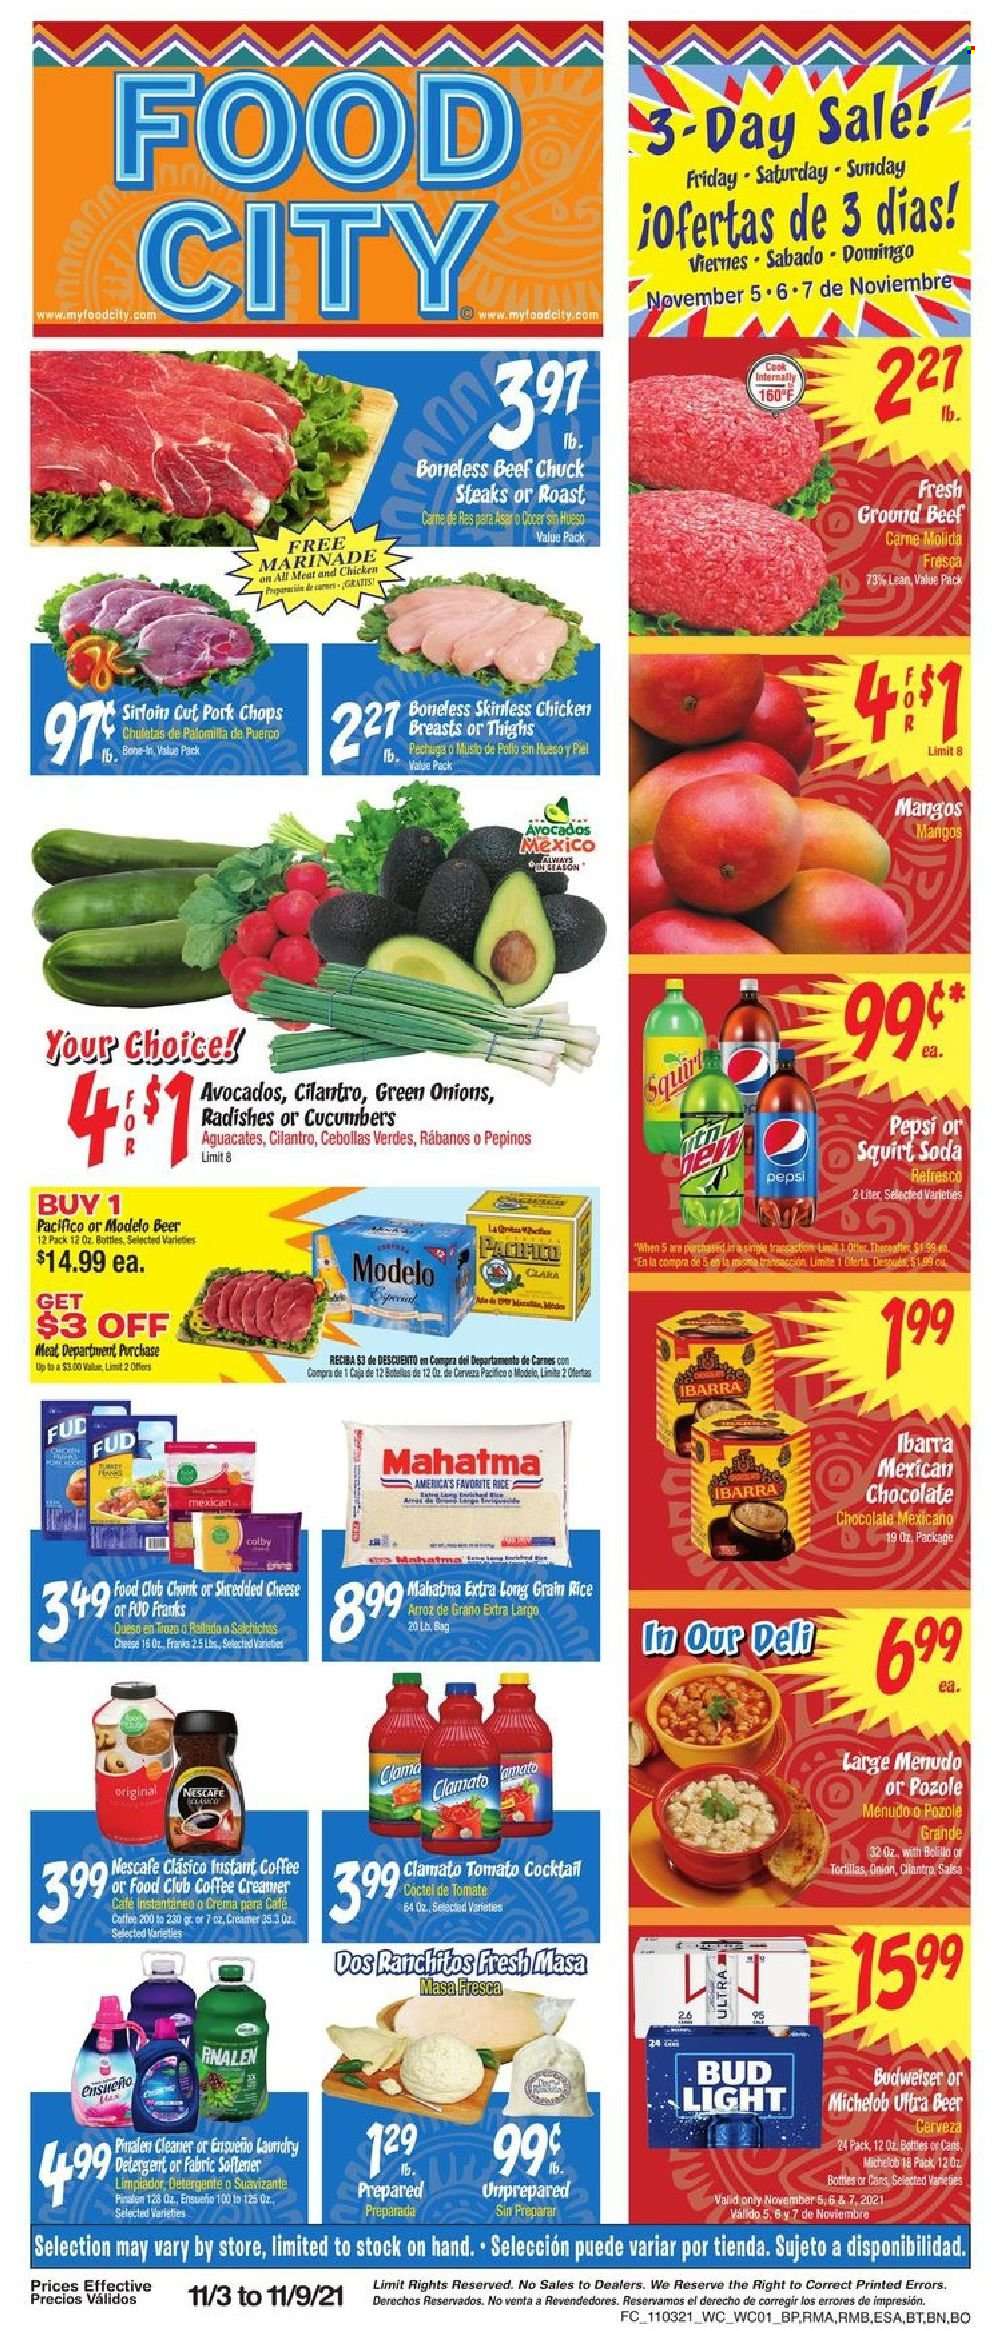 thumbnail - Food City Flyer - 11/03/2021 - 11/09/2021 - Sales products - tortillas, cucumber, radishes, avocado, Colby cheese, shredded cheese, creamer, chocolate, Mexicano, rice, long grain rice, cilantro, salsa, marinade, Pepsi, Clamato, soda, coffee, Nescafé, beer, Bud Light, Modelo, chicken breasts, beef meat, ground beef, steak, pork chops, pork meat, Budweiser, Michelob. Page 1.